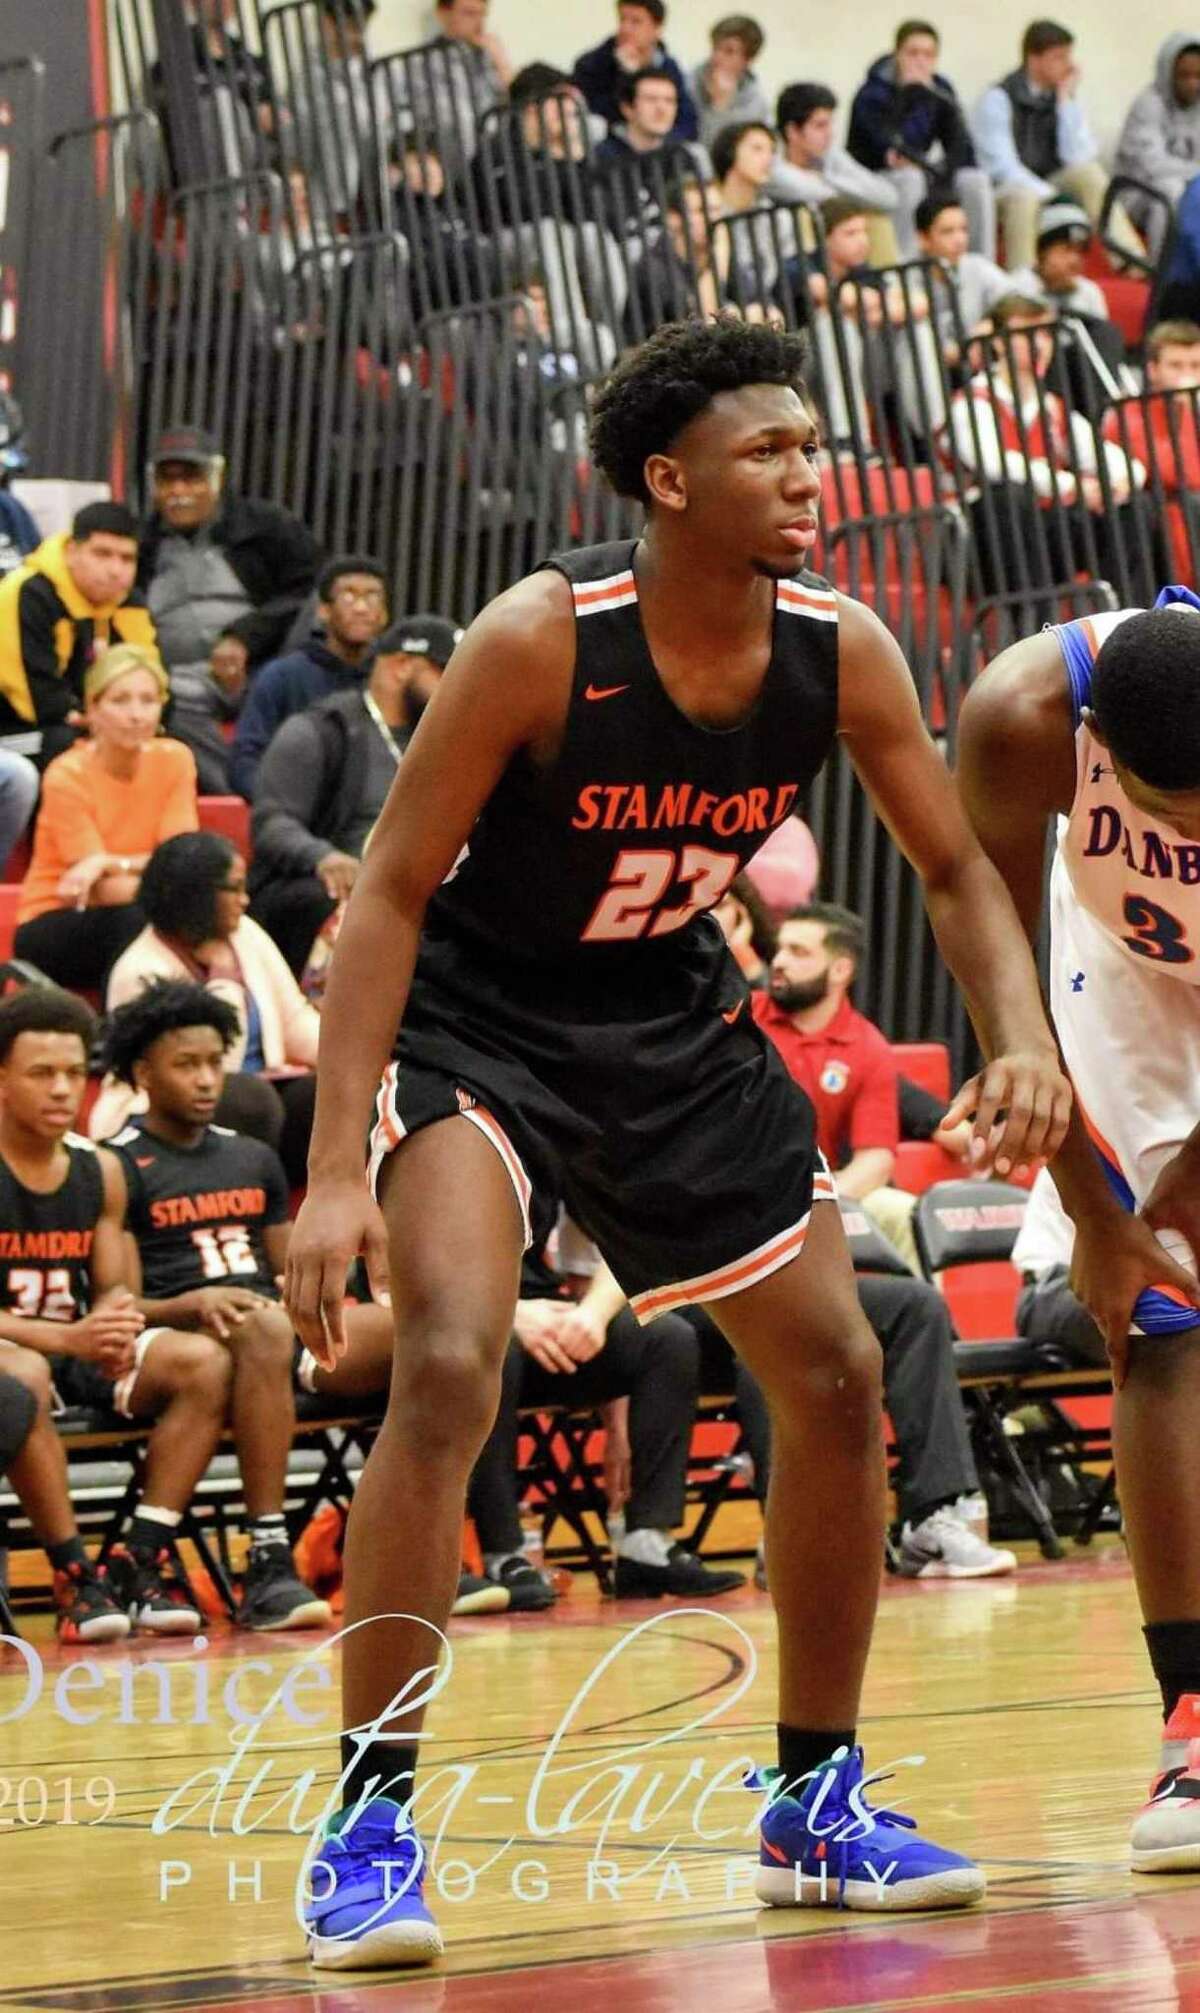 Nishawn Tolliver, shown in this photo taken in a basketball game at Stamford High School against Danbury High in the Spring of 2019.